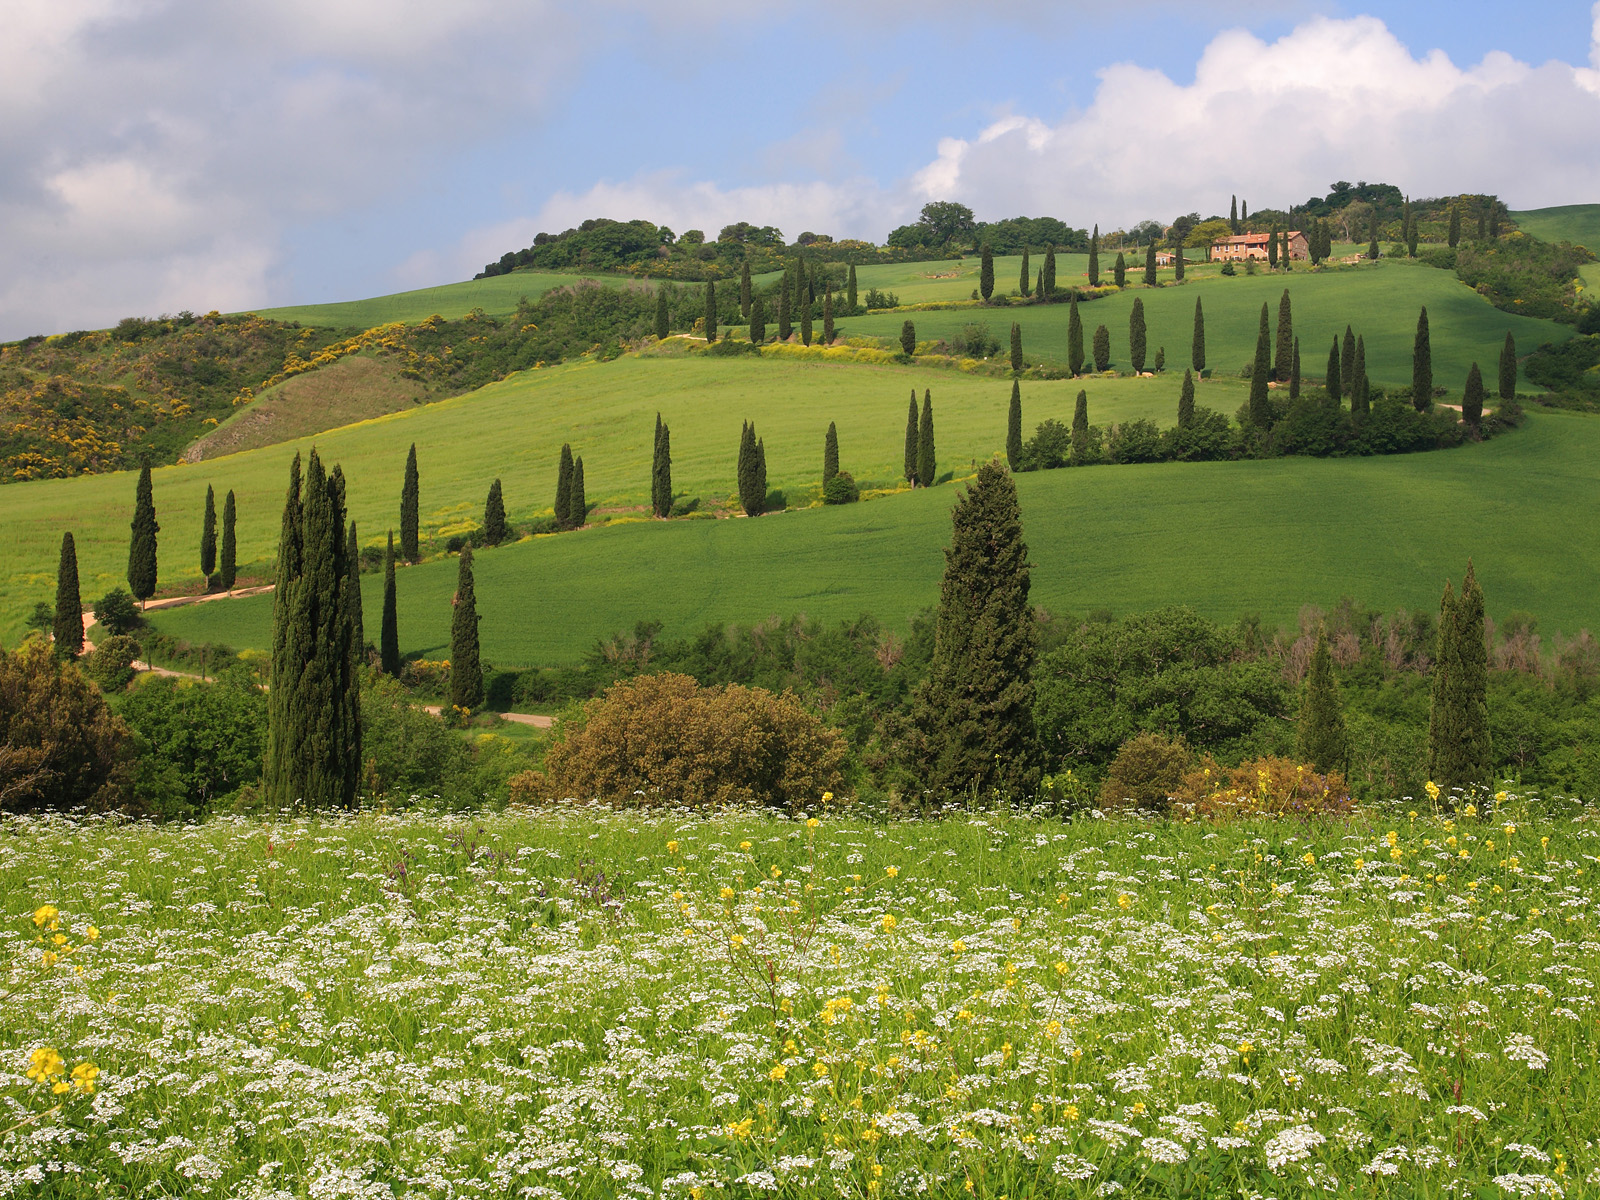 Hills of Tuscany Italy   hqworldnet   high quality sport and